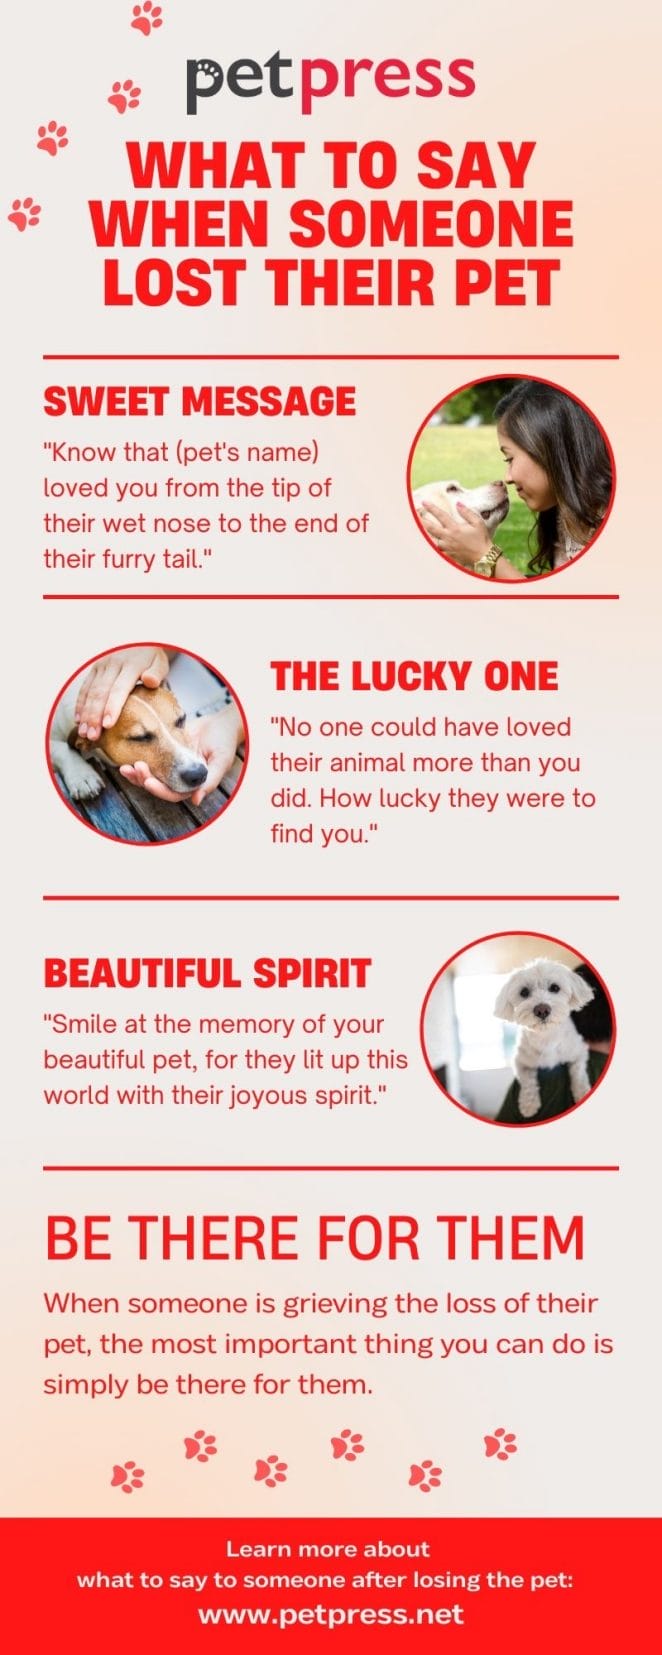 What to Say When Someone Lost Their Pet - Infographic